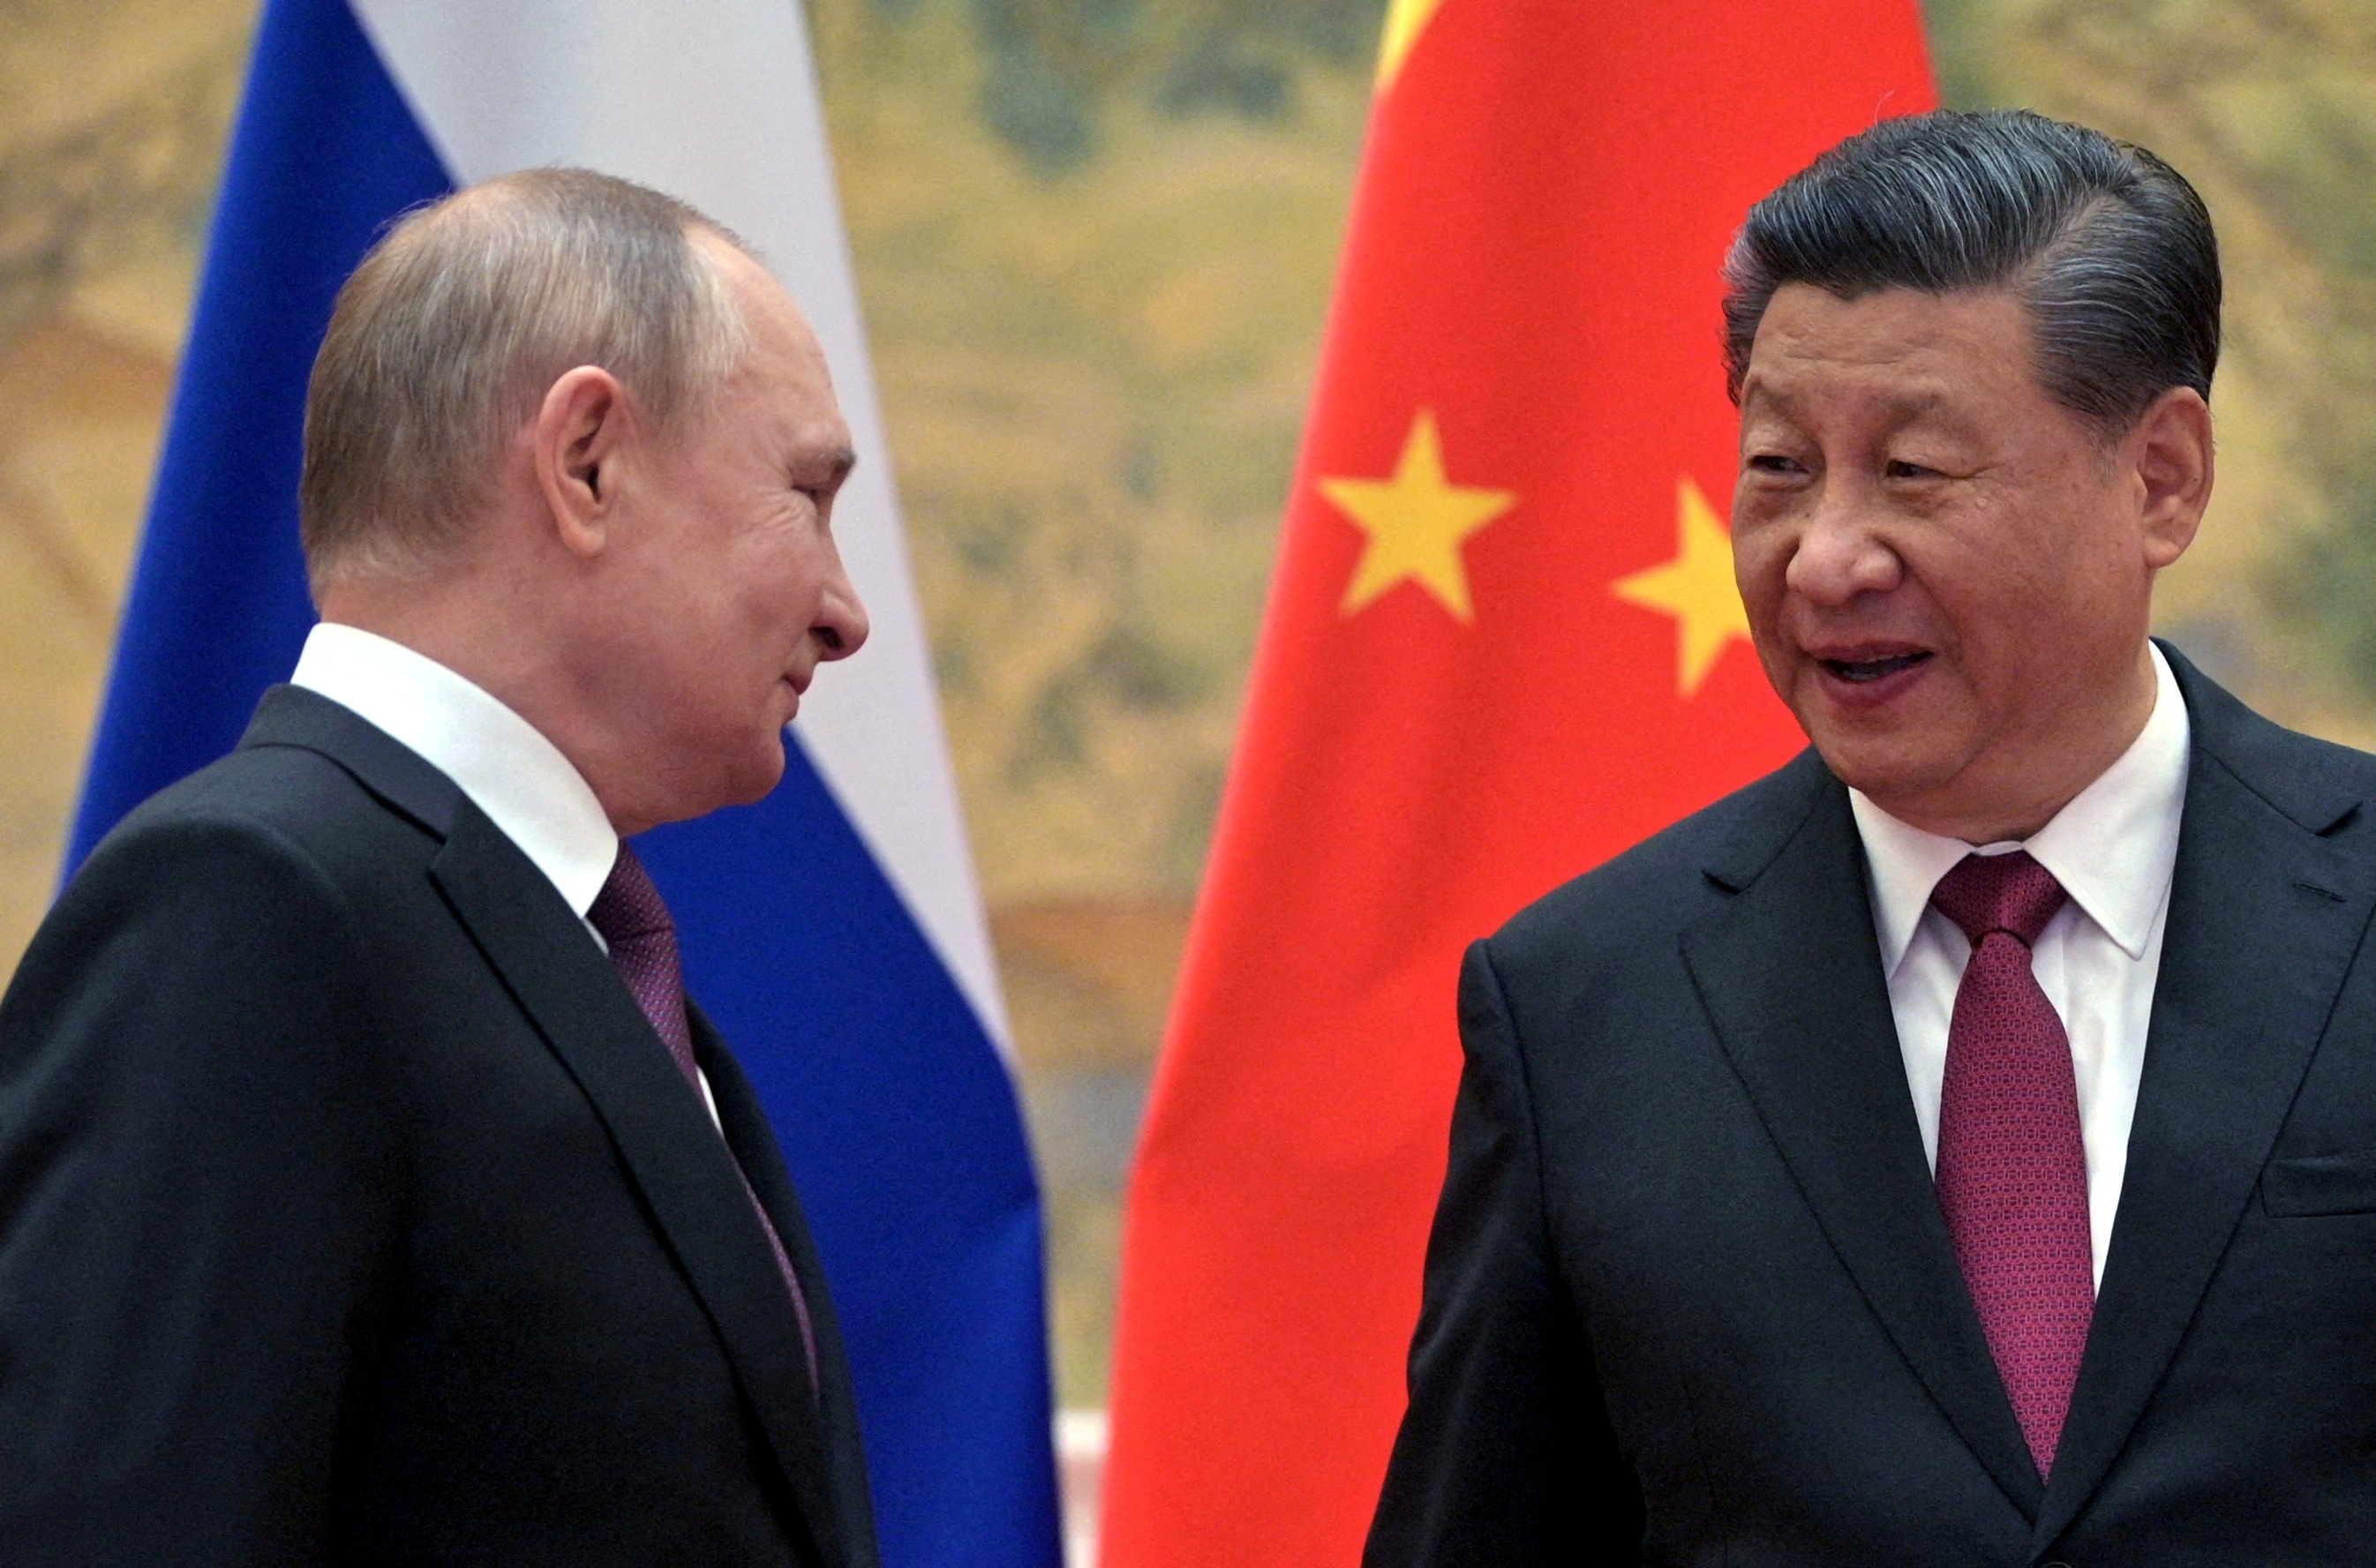 Russian President Vladimir Putin and Chinese Xi Jinping during a meeting before the war, when they declared a 